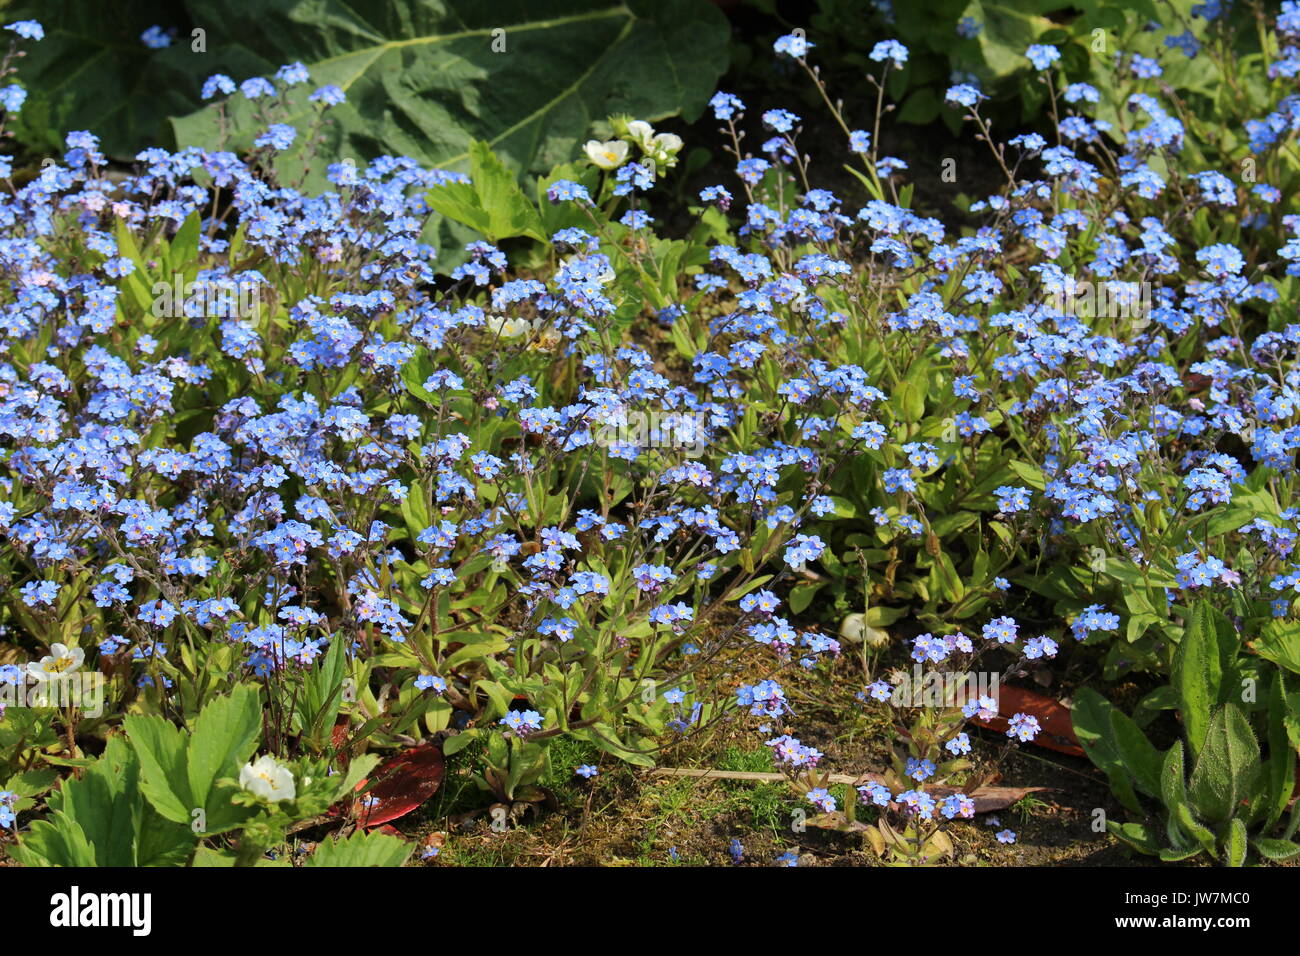 Forget-me-not in a garden Stock Photo